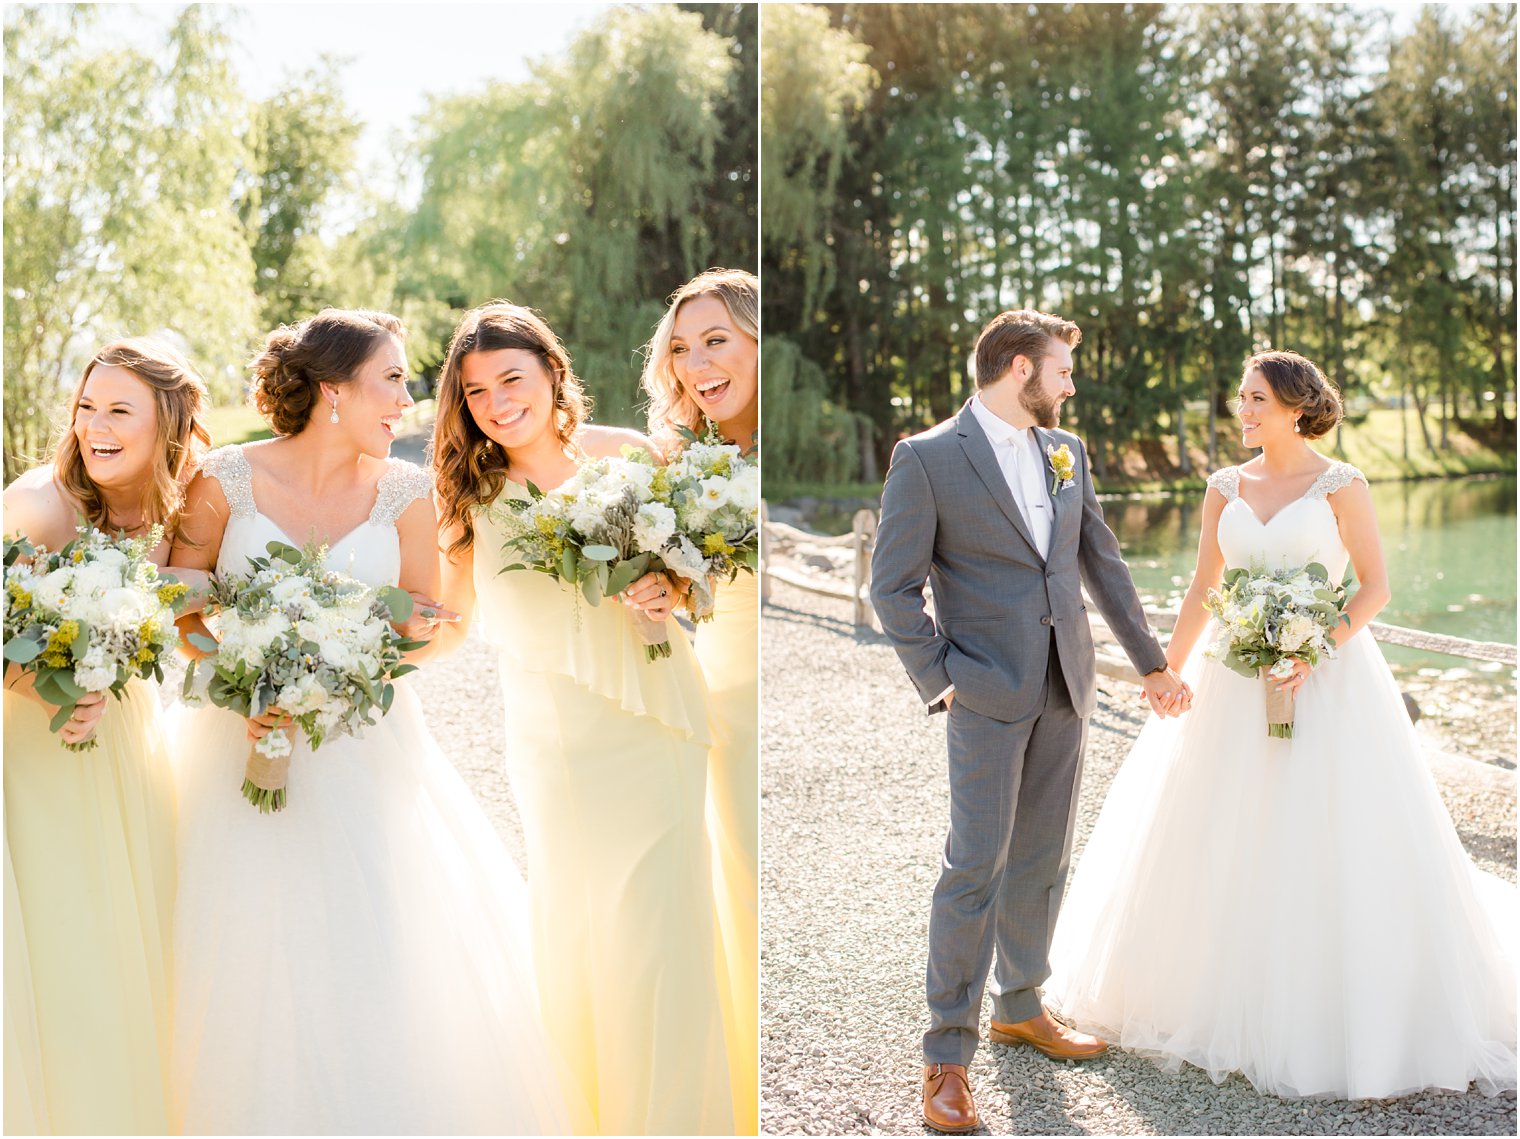 Bridal party photos at Windows on the Water at Frogbridge Wedding